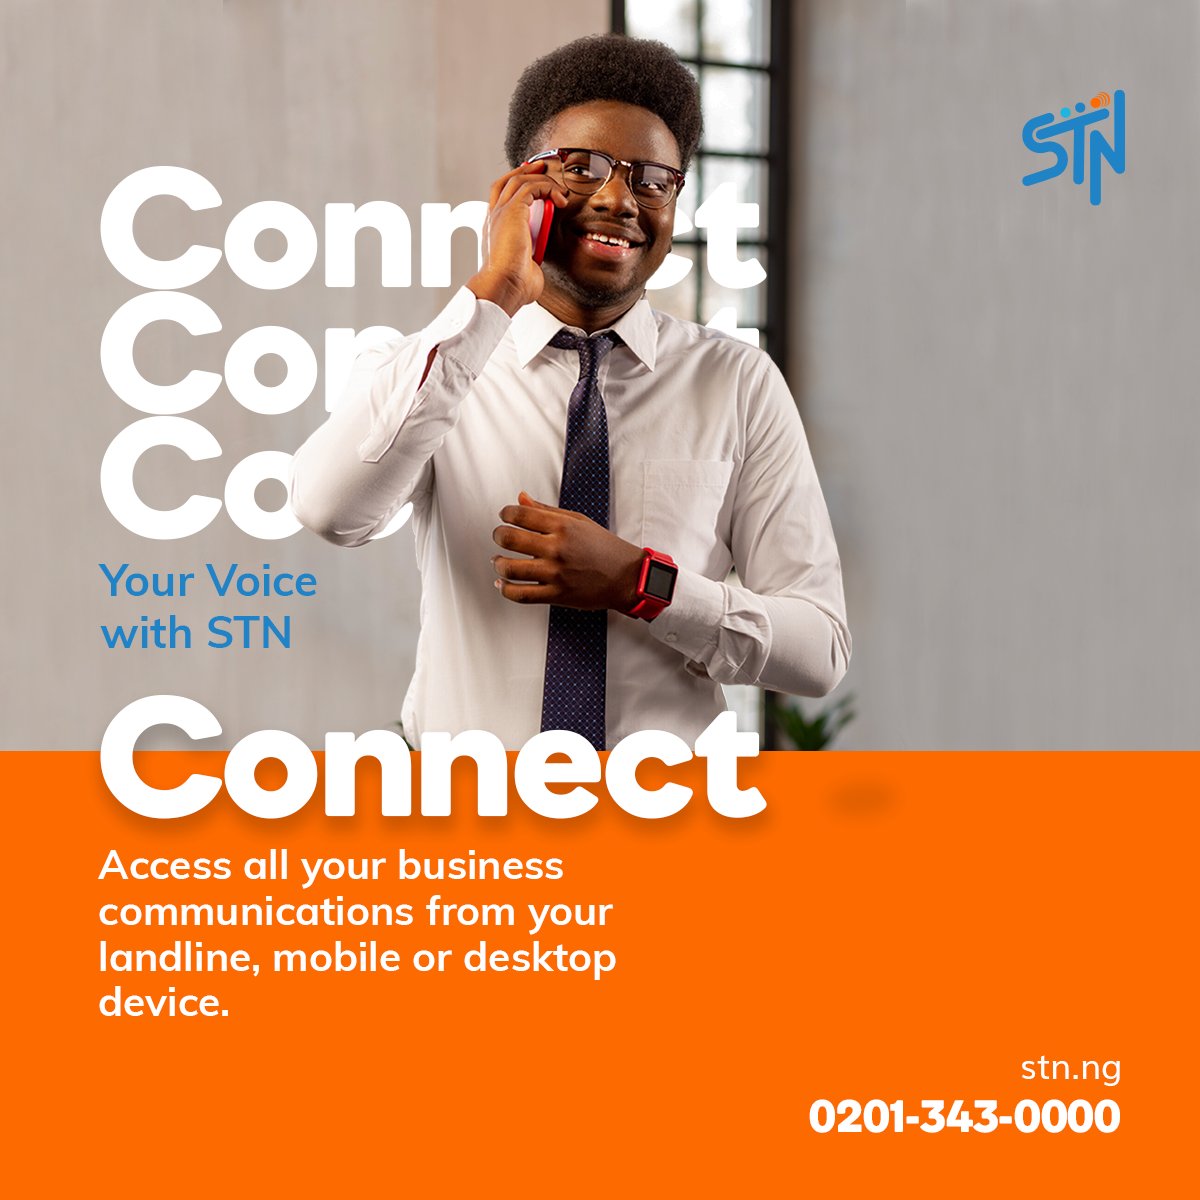 Stay connected, stay productive.

Access all your business communications seamlessly from your landline, mobile devices, or desktop. 

Work smarter, not harder. 

#BusinessAnywhere
#StayConnected
#StnNigeria
#UnifiedCommunication